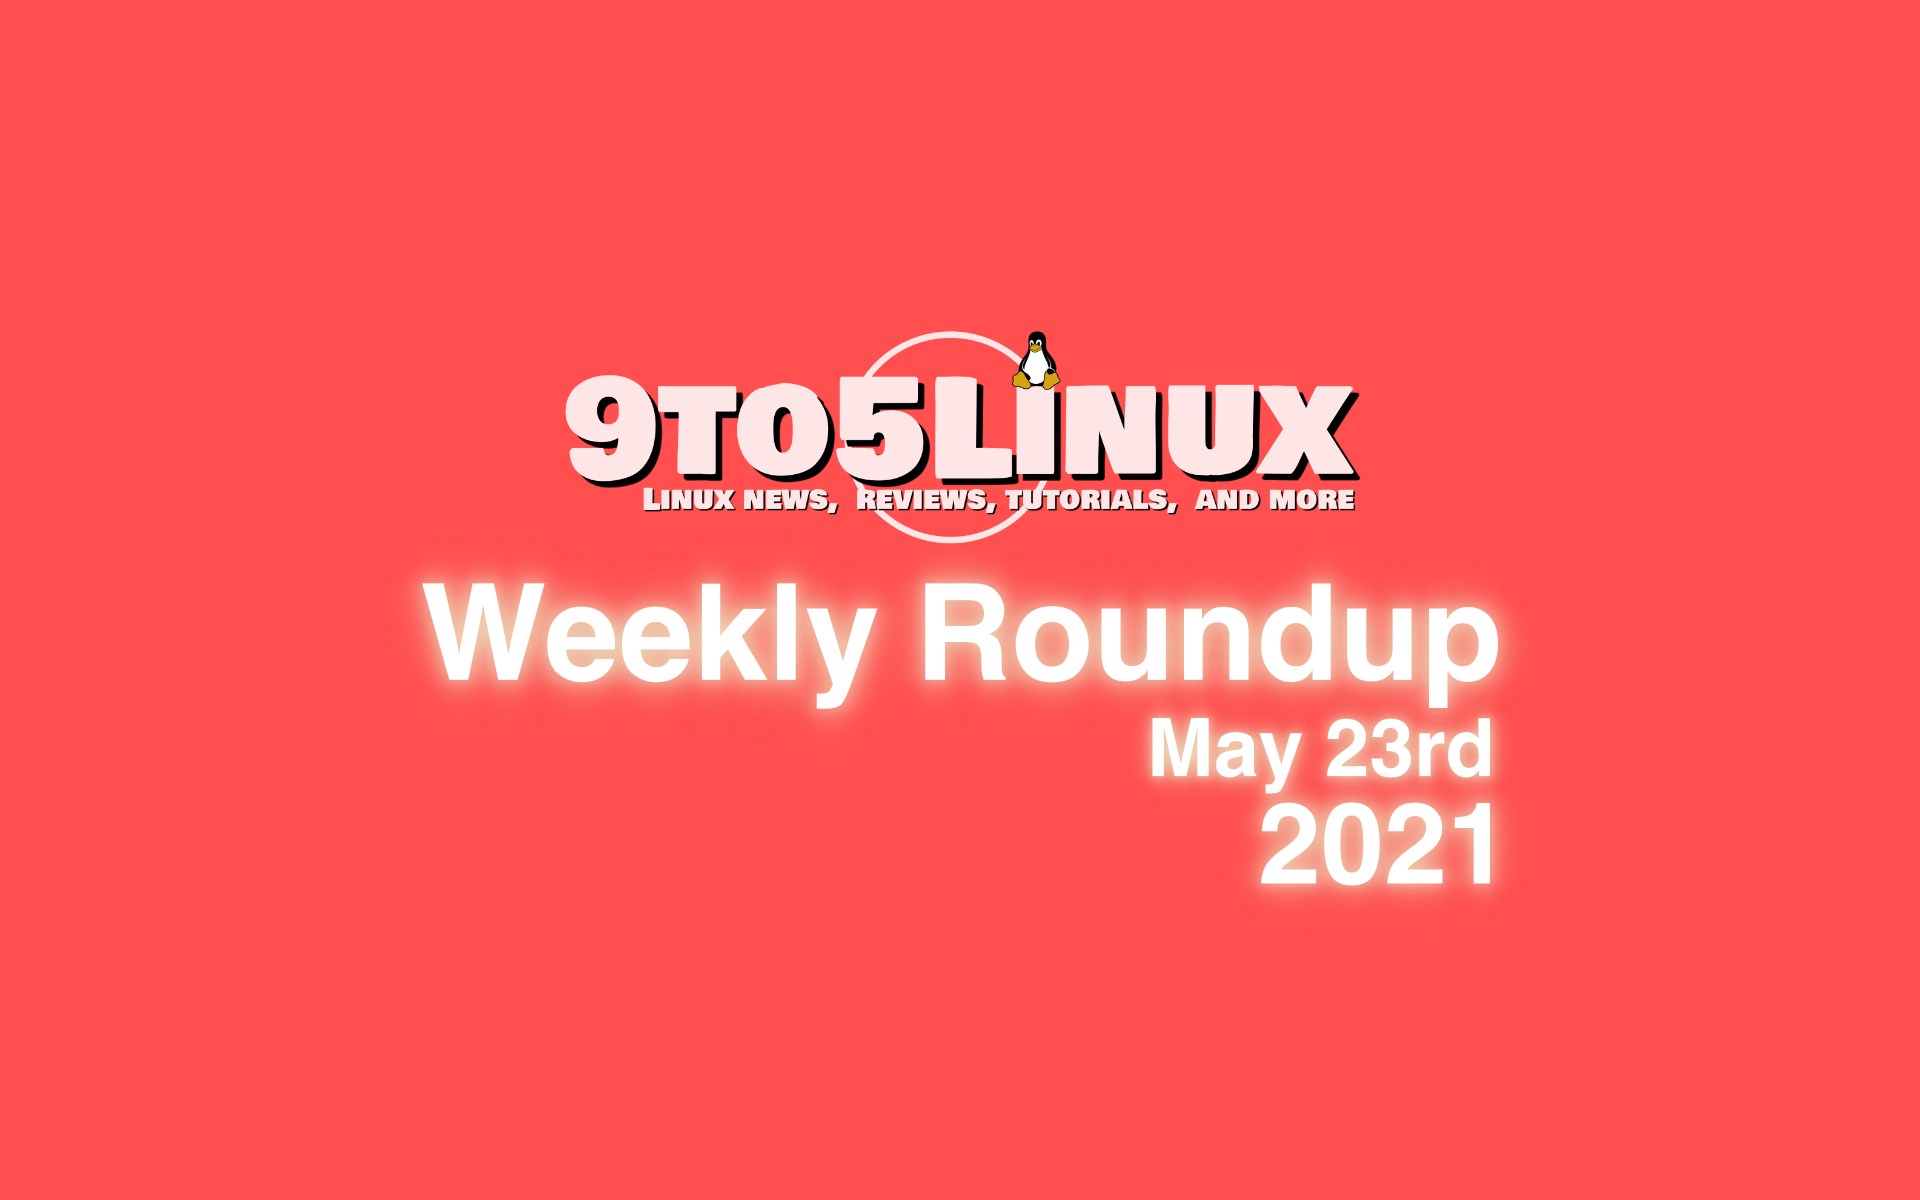 9to5Linux Weekly Roundup: May 23rd, 2021